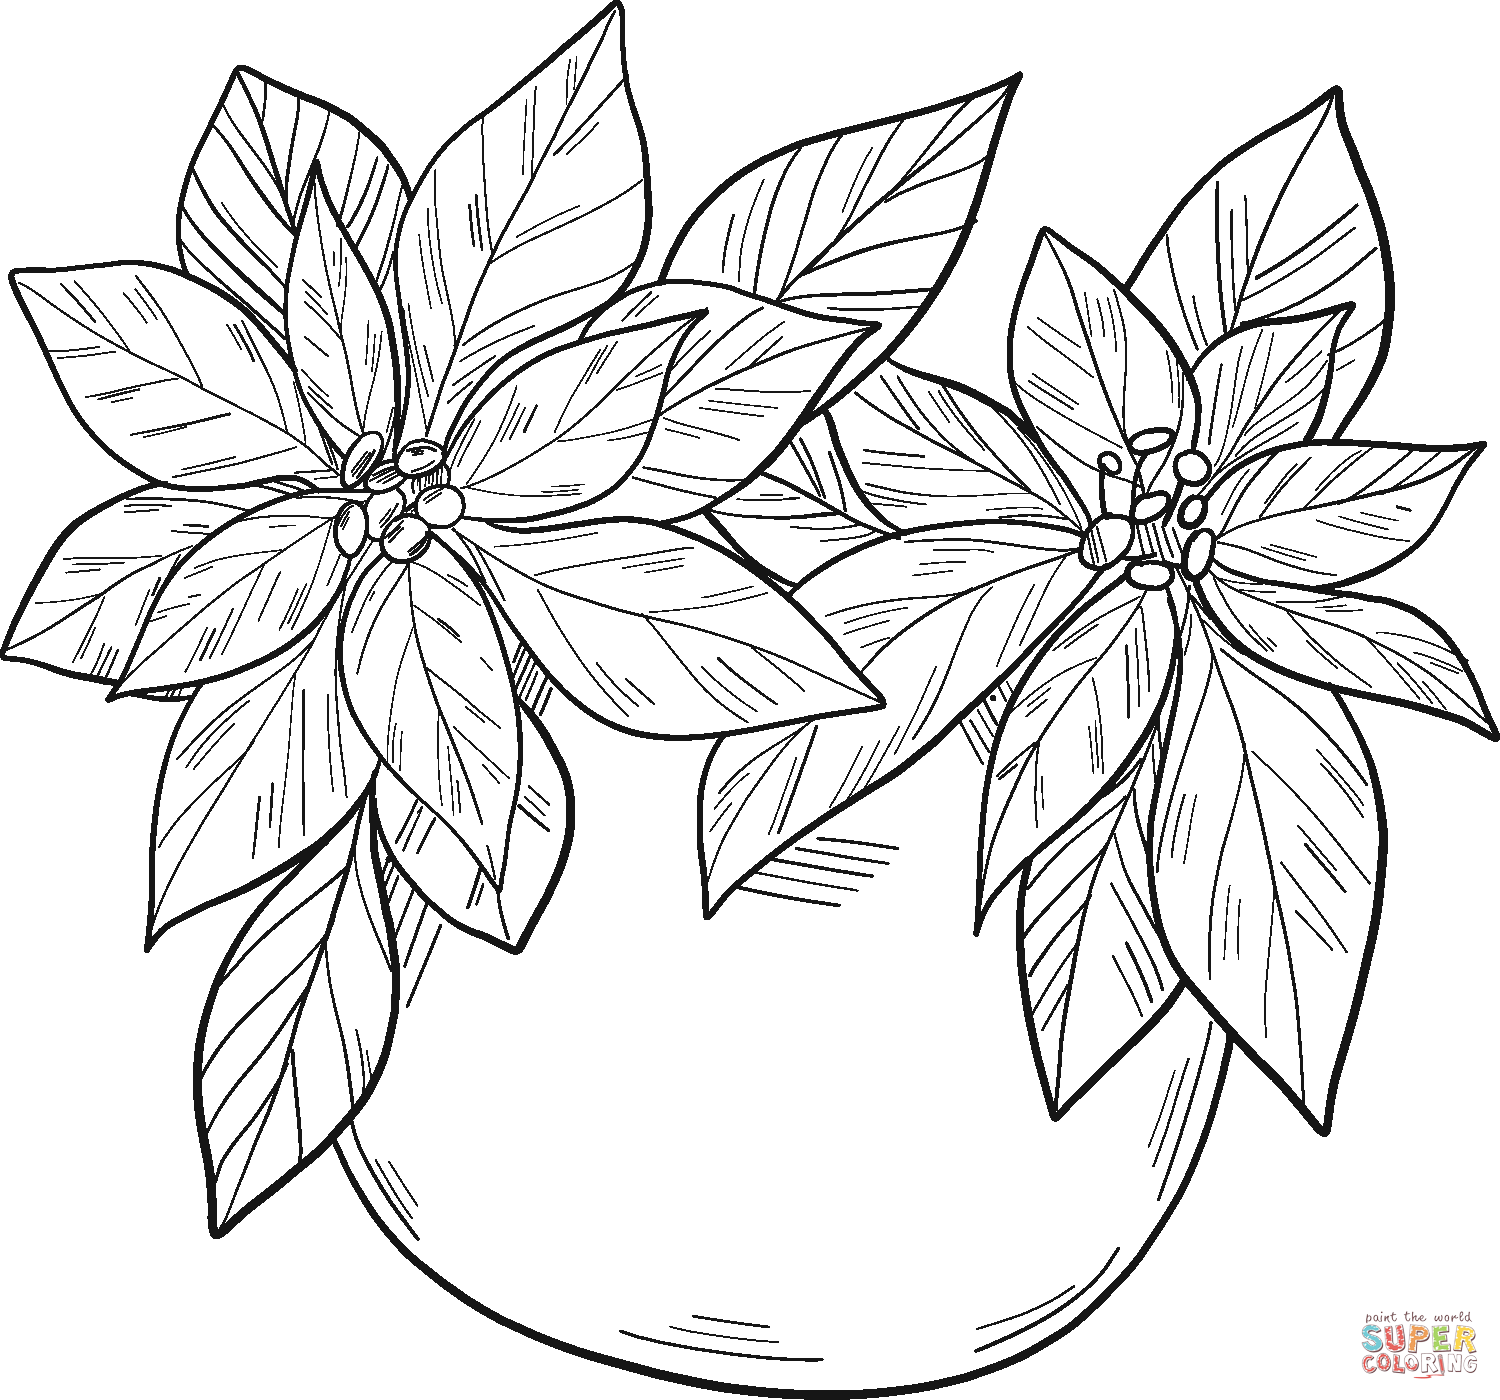 Poinsettia in a pot coloring page free printable coloring pages